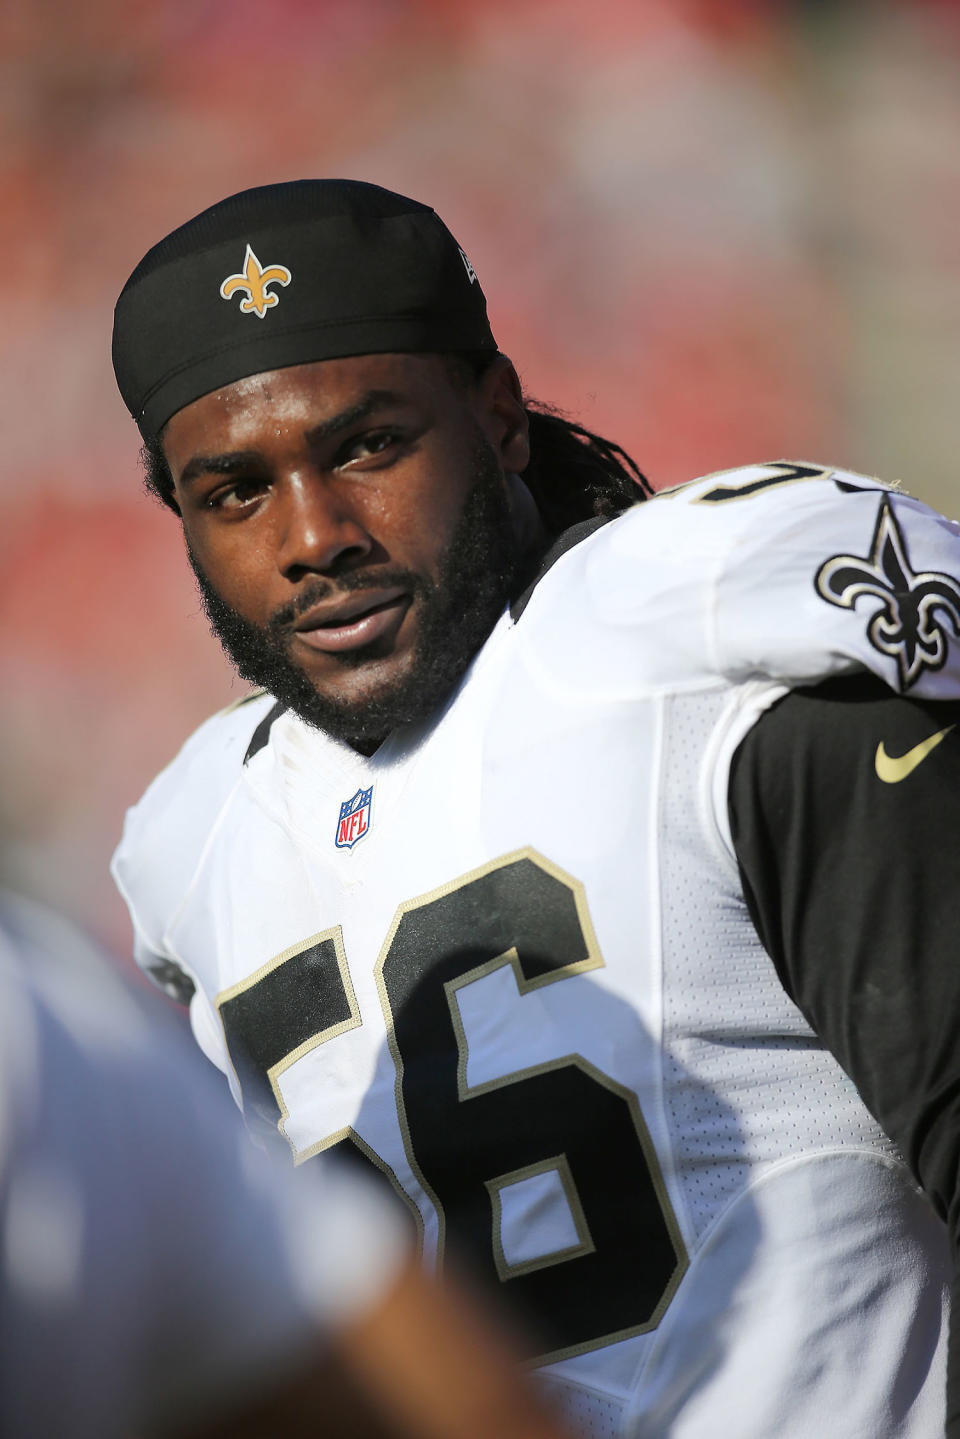 Ronald Powell #56 of the New Orleans Saints is seen on the sideline during an NFL football game between the New Orleans Saints and the Tampa Bay Buccaneers at Raymond James Stadium on December 28, 2014 in Tampa, Florida.  (Alex Menendez / Getty Images)